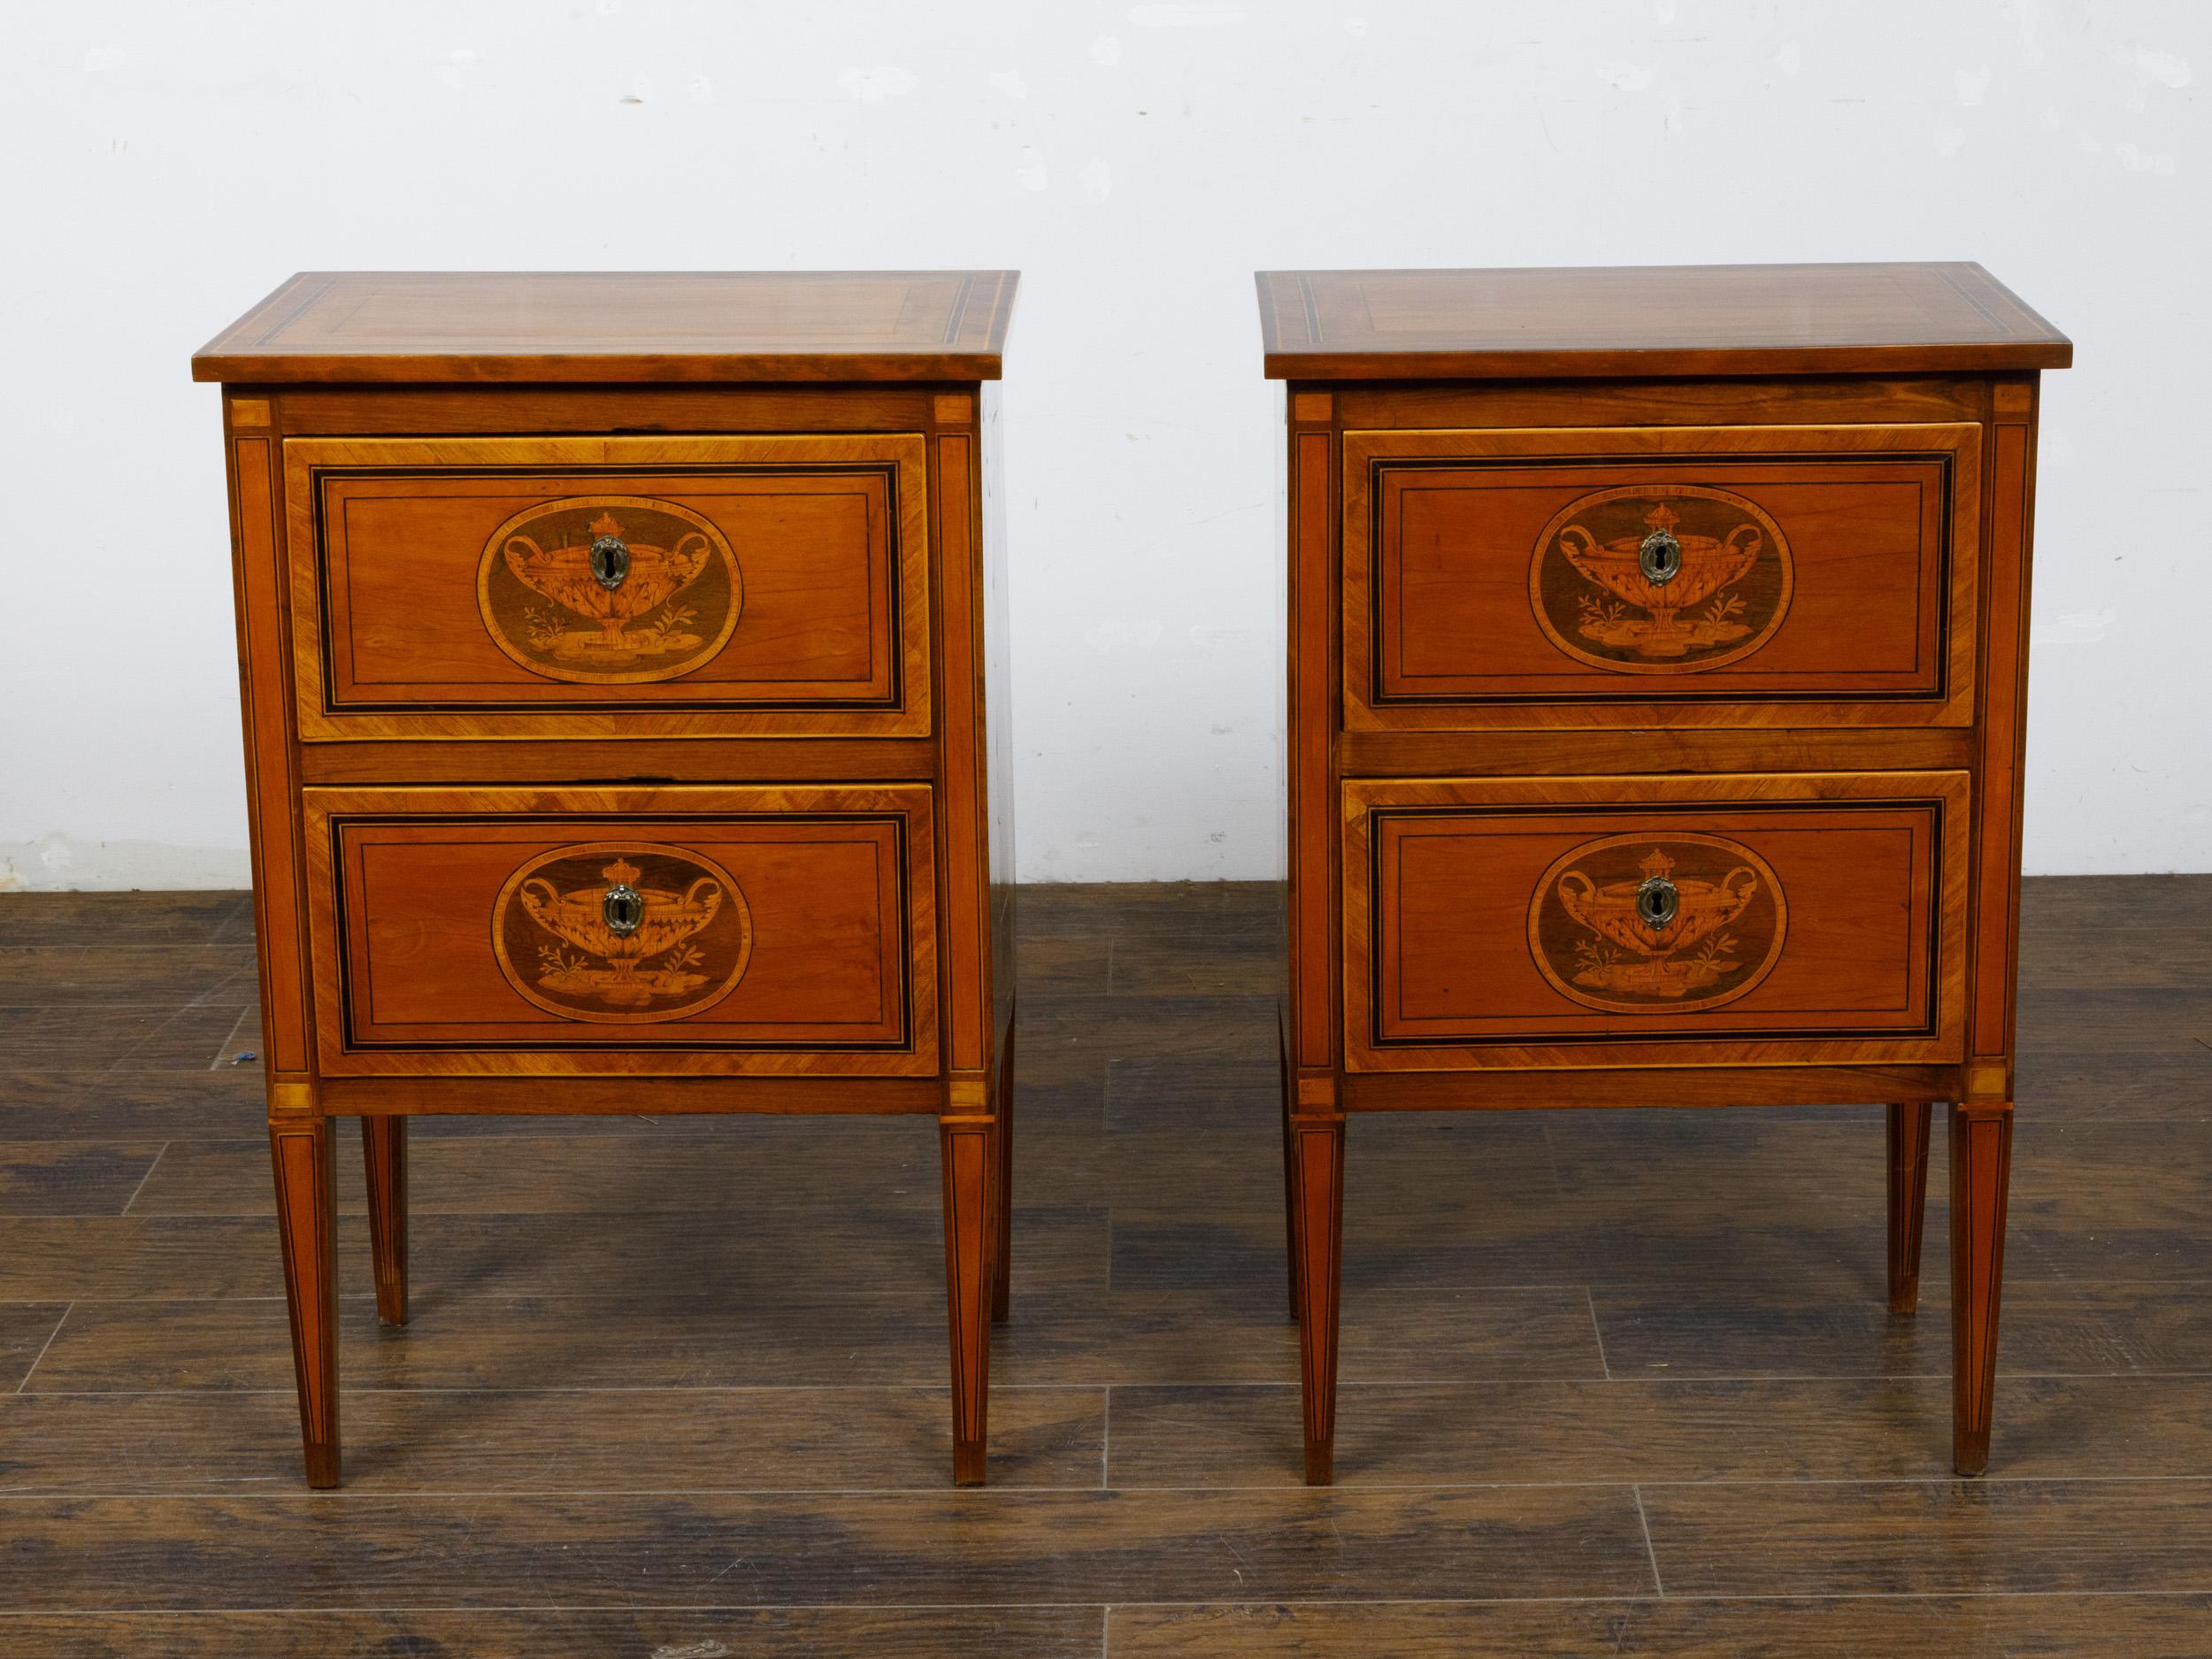 Pair of Italian Neoclassical 1800s Walnut Bedside Tables with Marquetry Décor For Sale 8